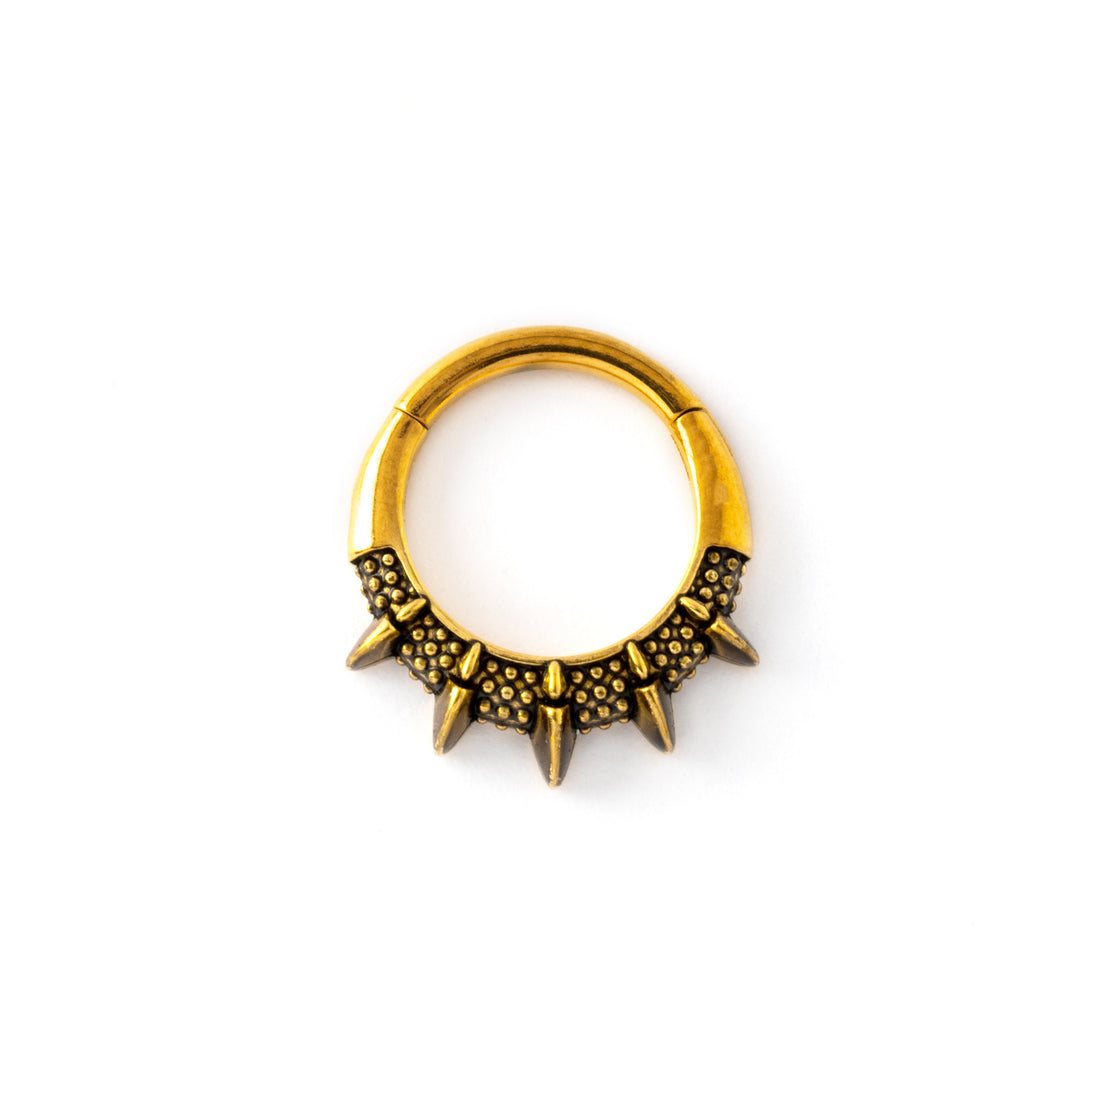 antique gold colour spiky septum clicker ring frontal view